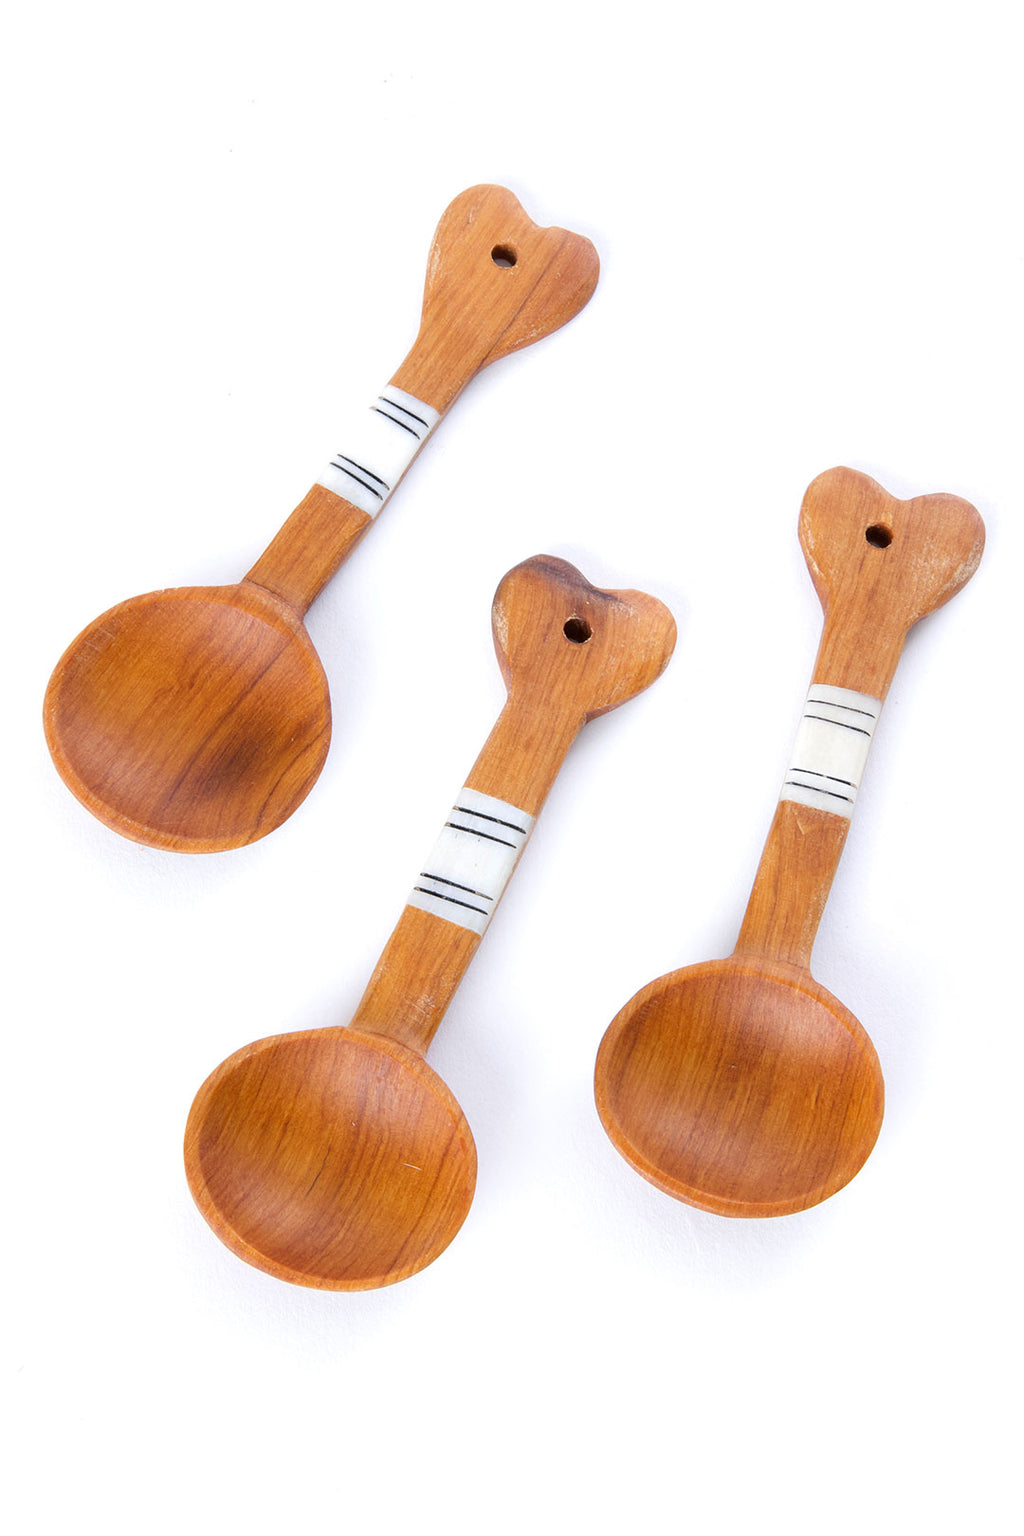 Set of Three Wild Olive Wood Spoons with Heart Handles